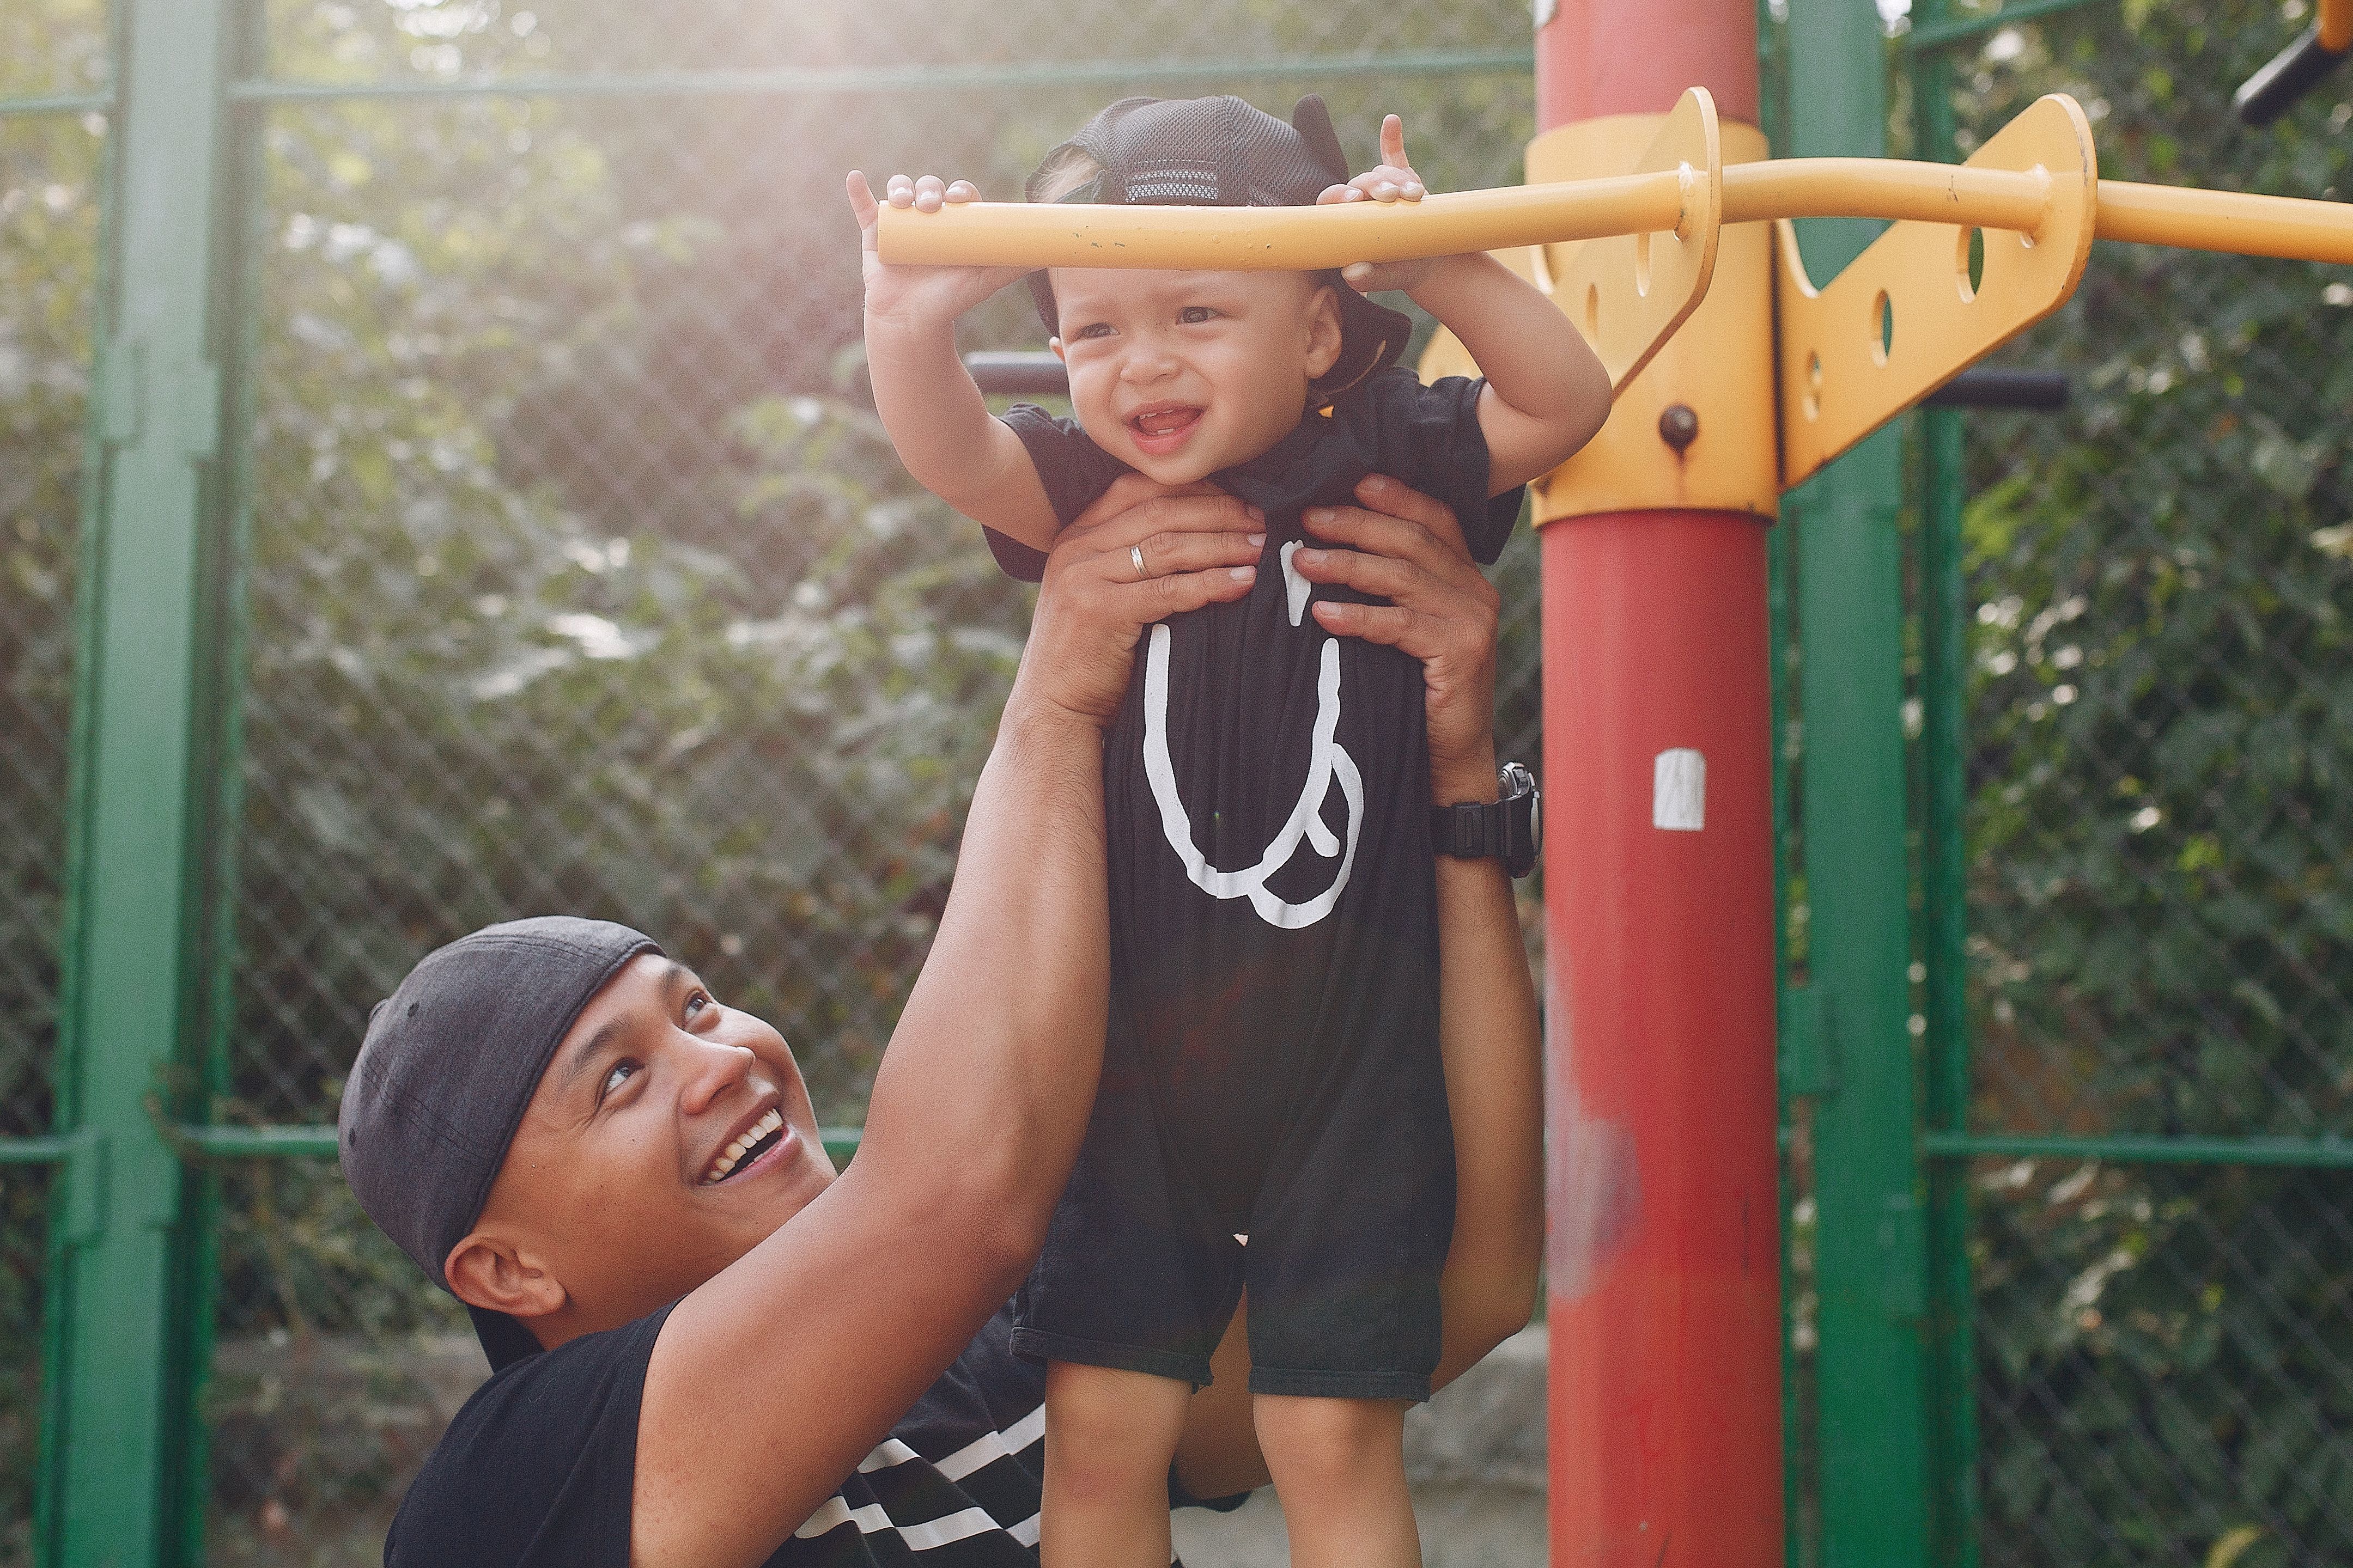 A father holding up a young boy at a playground.